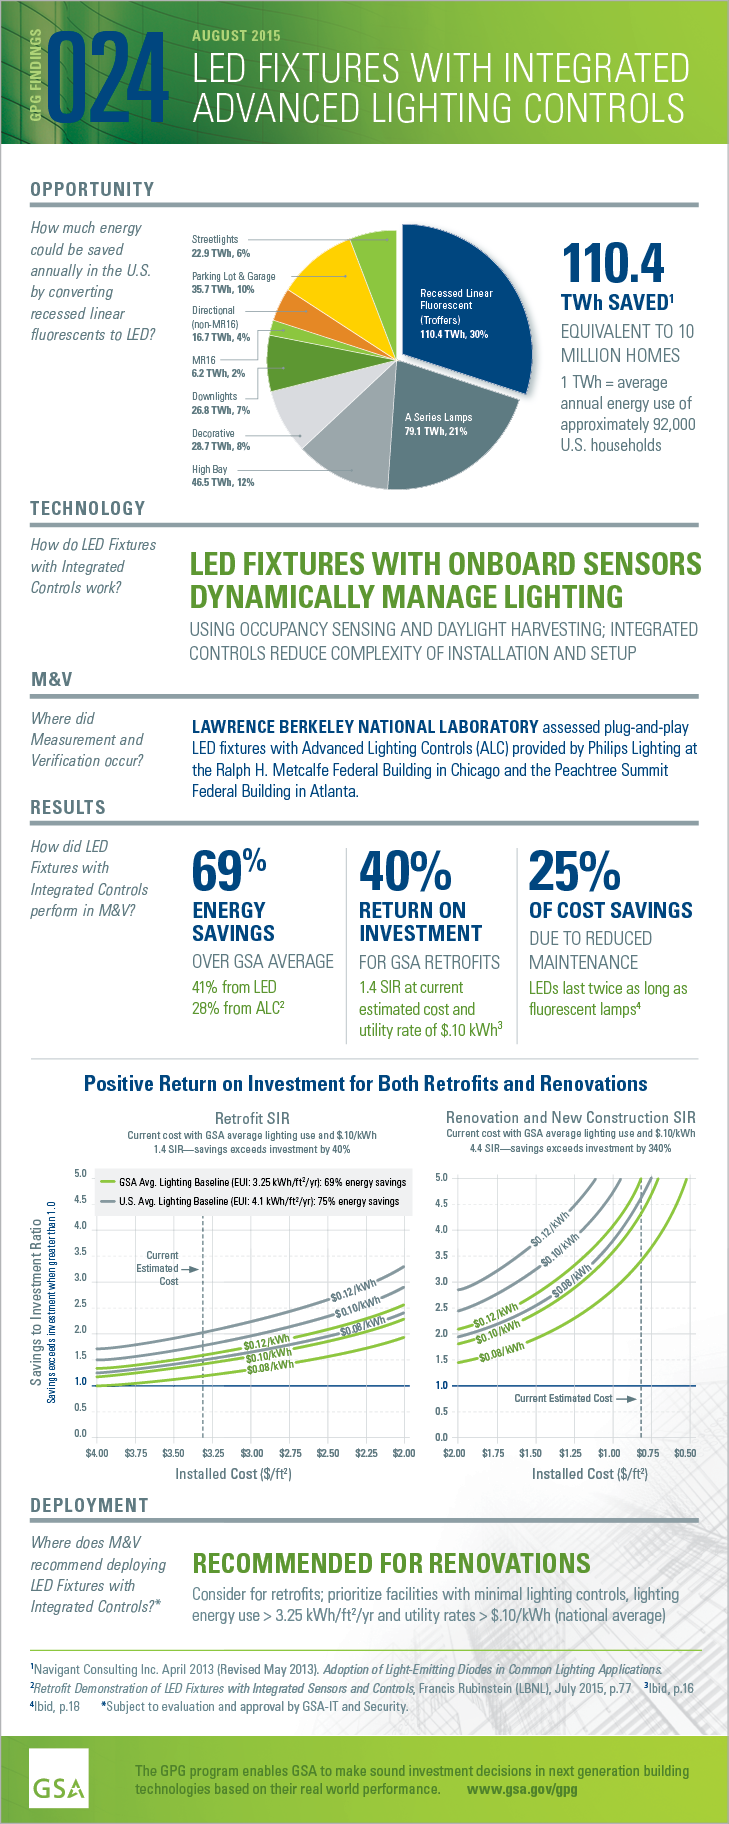 Download the PDF version of the full-size infographic for GPG024 LED Fixtures with Integrated Advanced Lighting Controls.